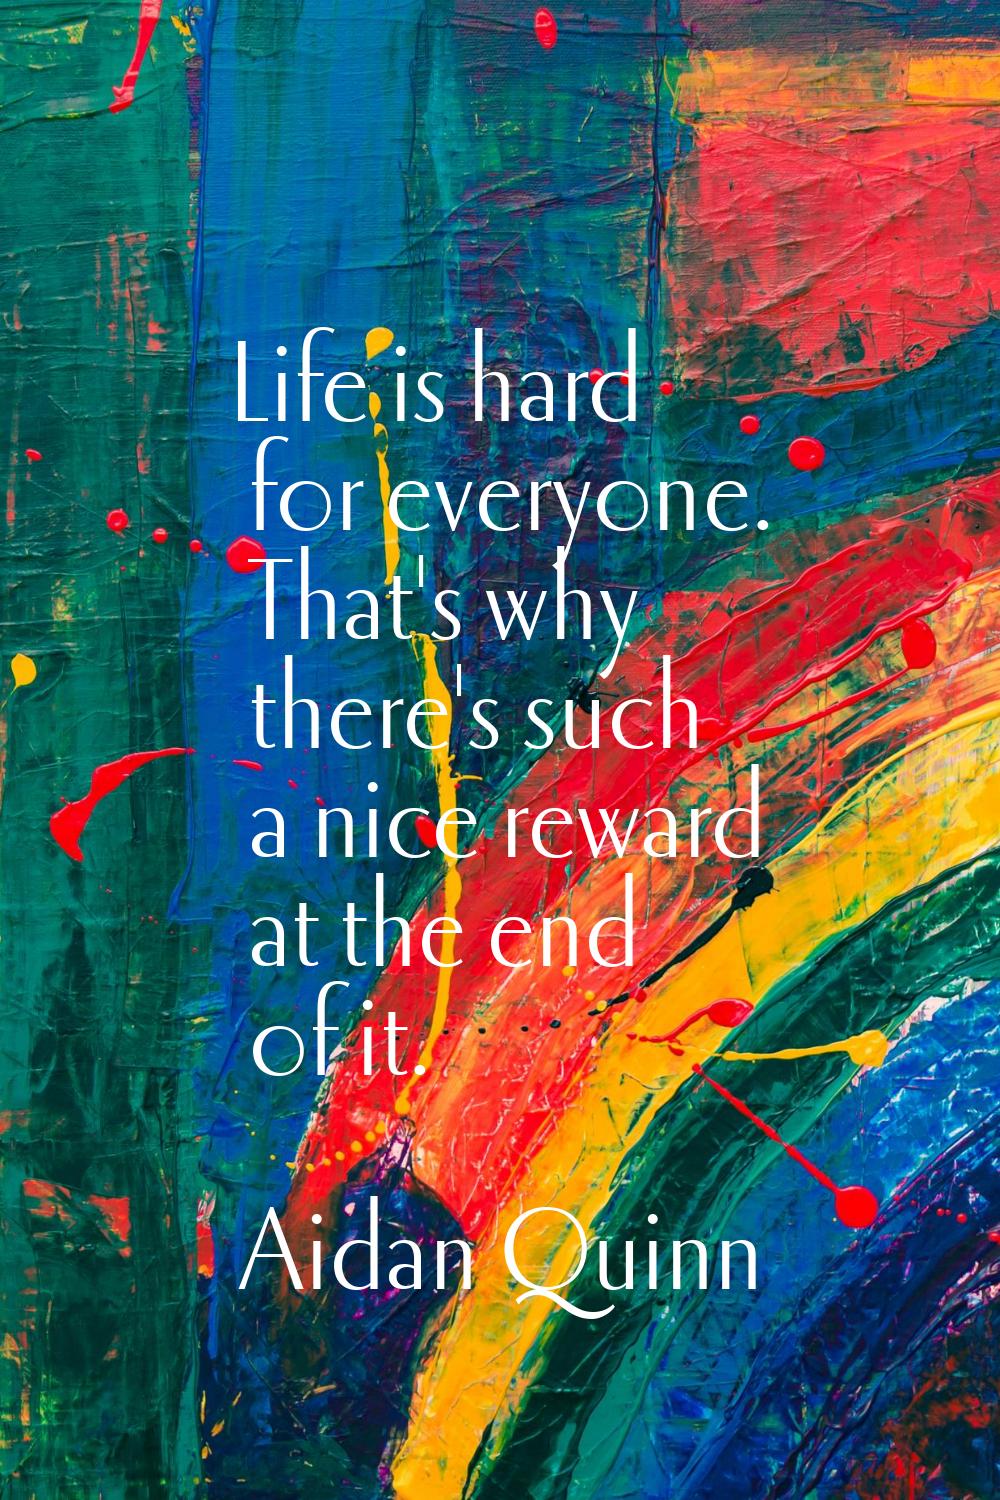 Life is hard for everyone. That's why there's such a nice reward at the end of it.